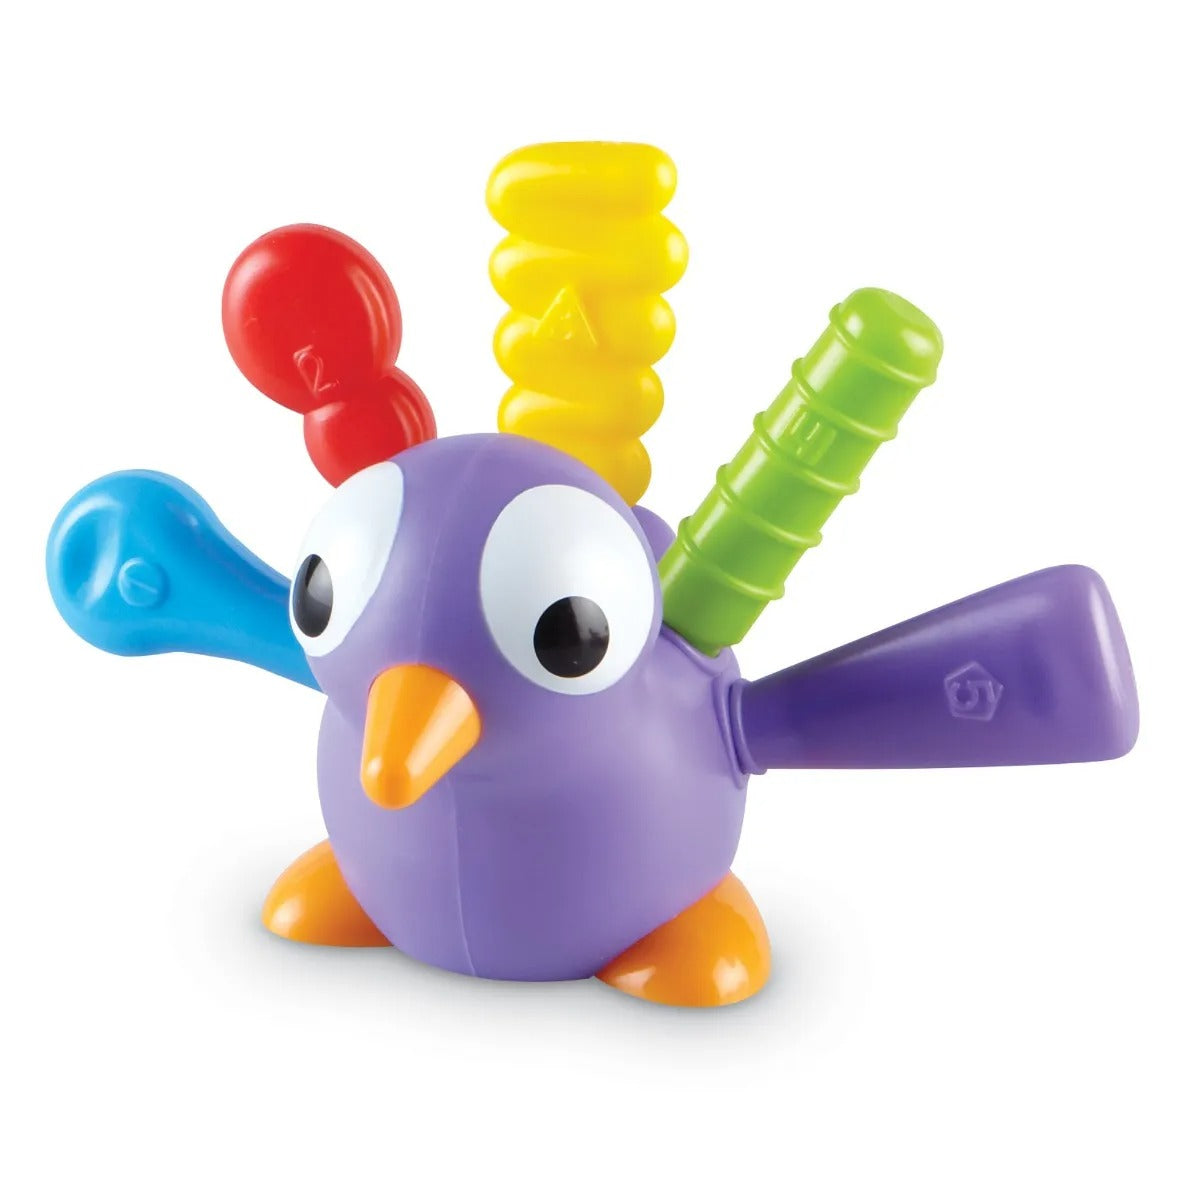 Pedro the Fine Motor Peacock, Fine motor fun never looked so fancy! Kids build the essential fine motor skills they need to succeed in school and beyond every time they play with Pedro the Fine Motor Peacock. The friendliest fine motor toy for toddlers, this fine feathered peacock comes with 5 pinchable, pullable feathers. With push-in, pop-out play, these feathers make it easy for kids to build their hand strength, coordination, and other essentials of fine motor skill development. Pedro's feathers also co